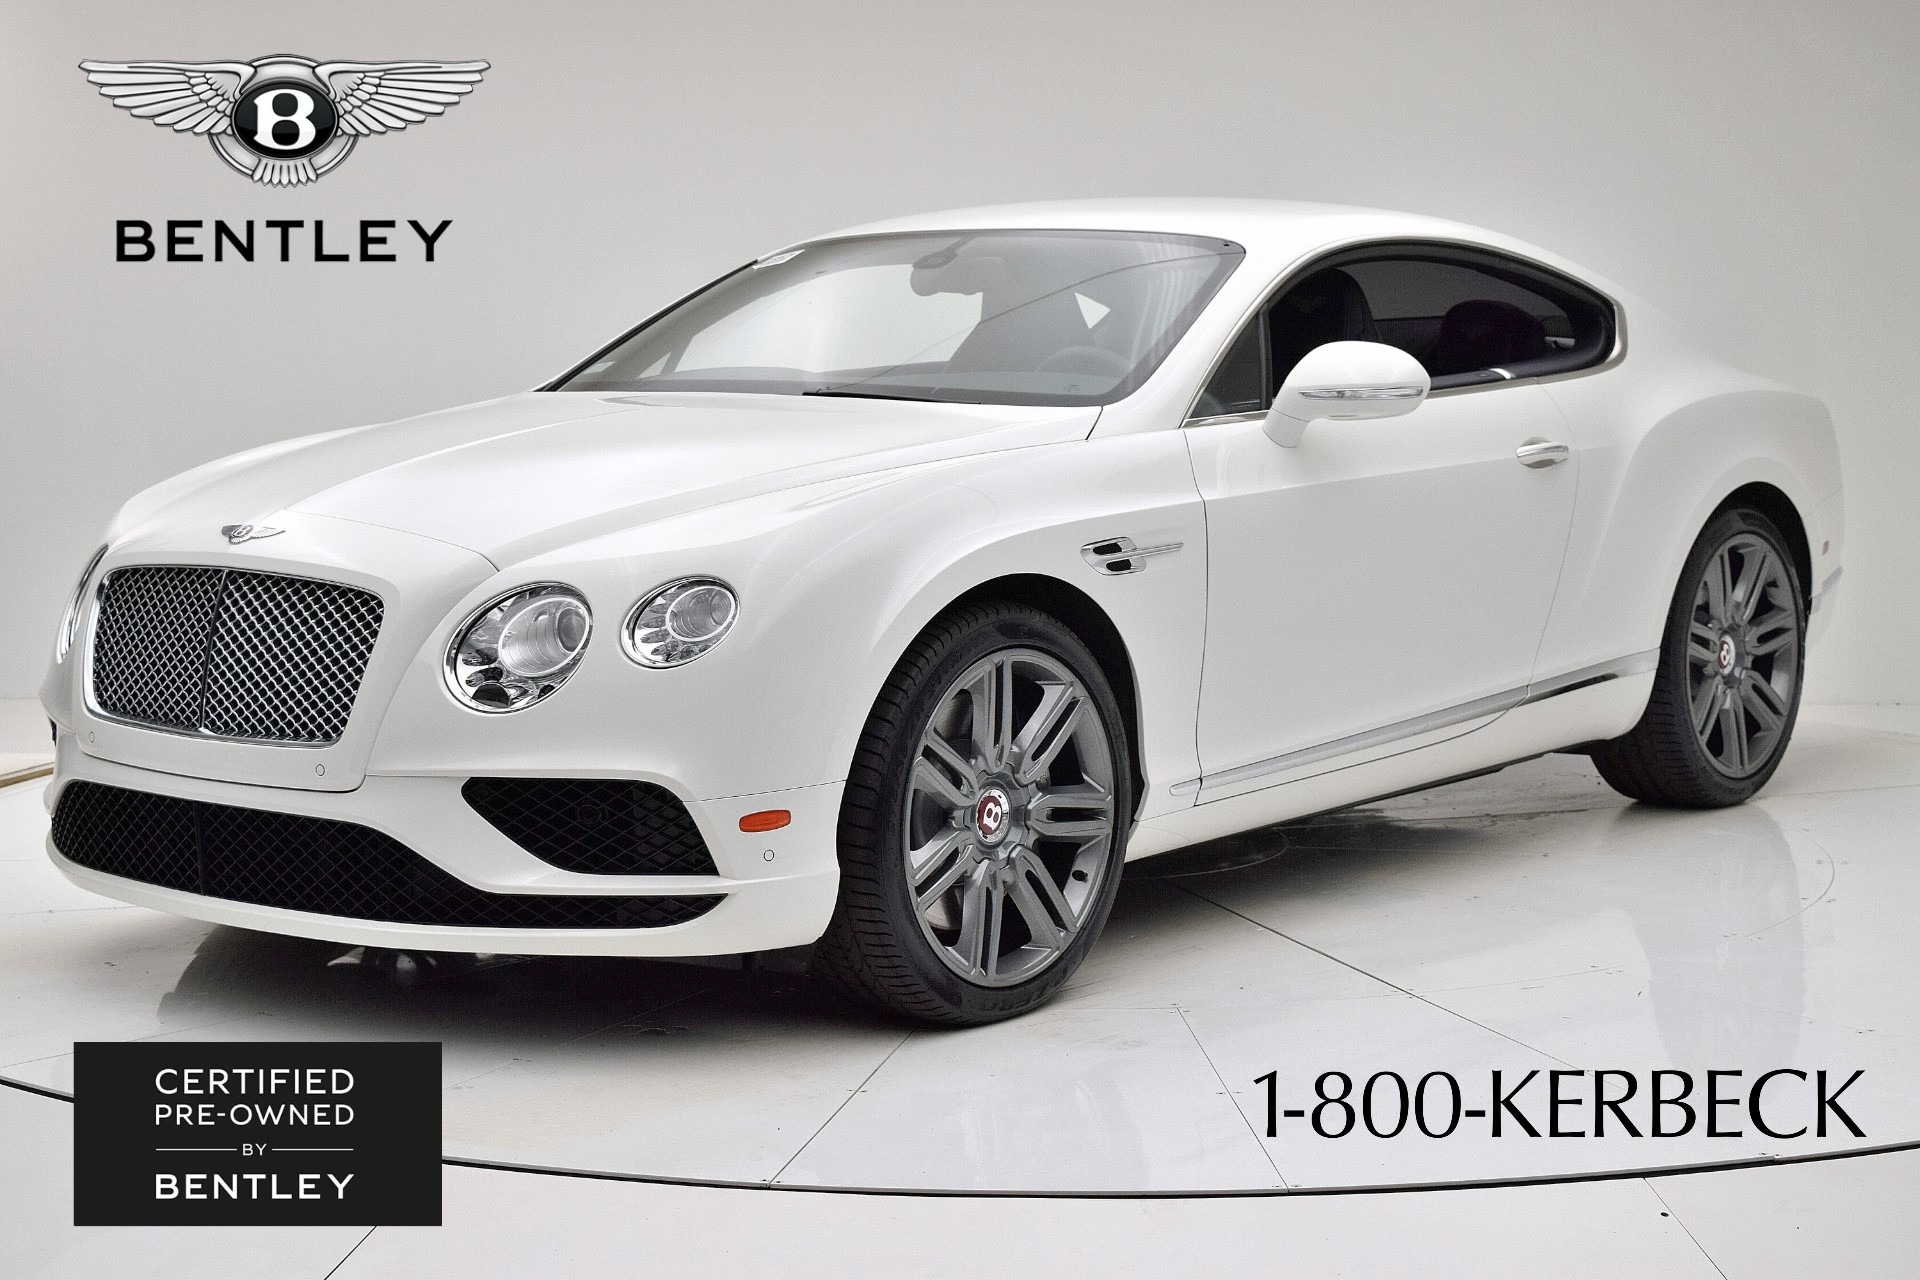 Used 2016 Bentley Continental GT V8 for sale $109,000 at Bentley Palmyra N.J. in Palmyra NJ 08065 2